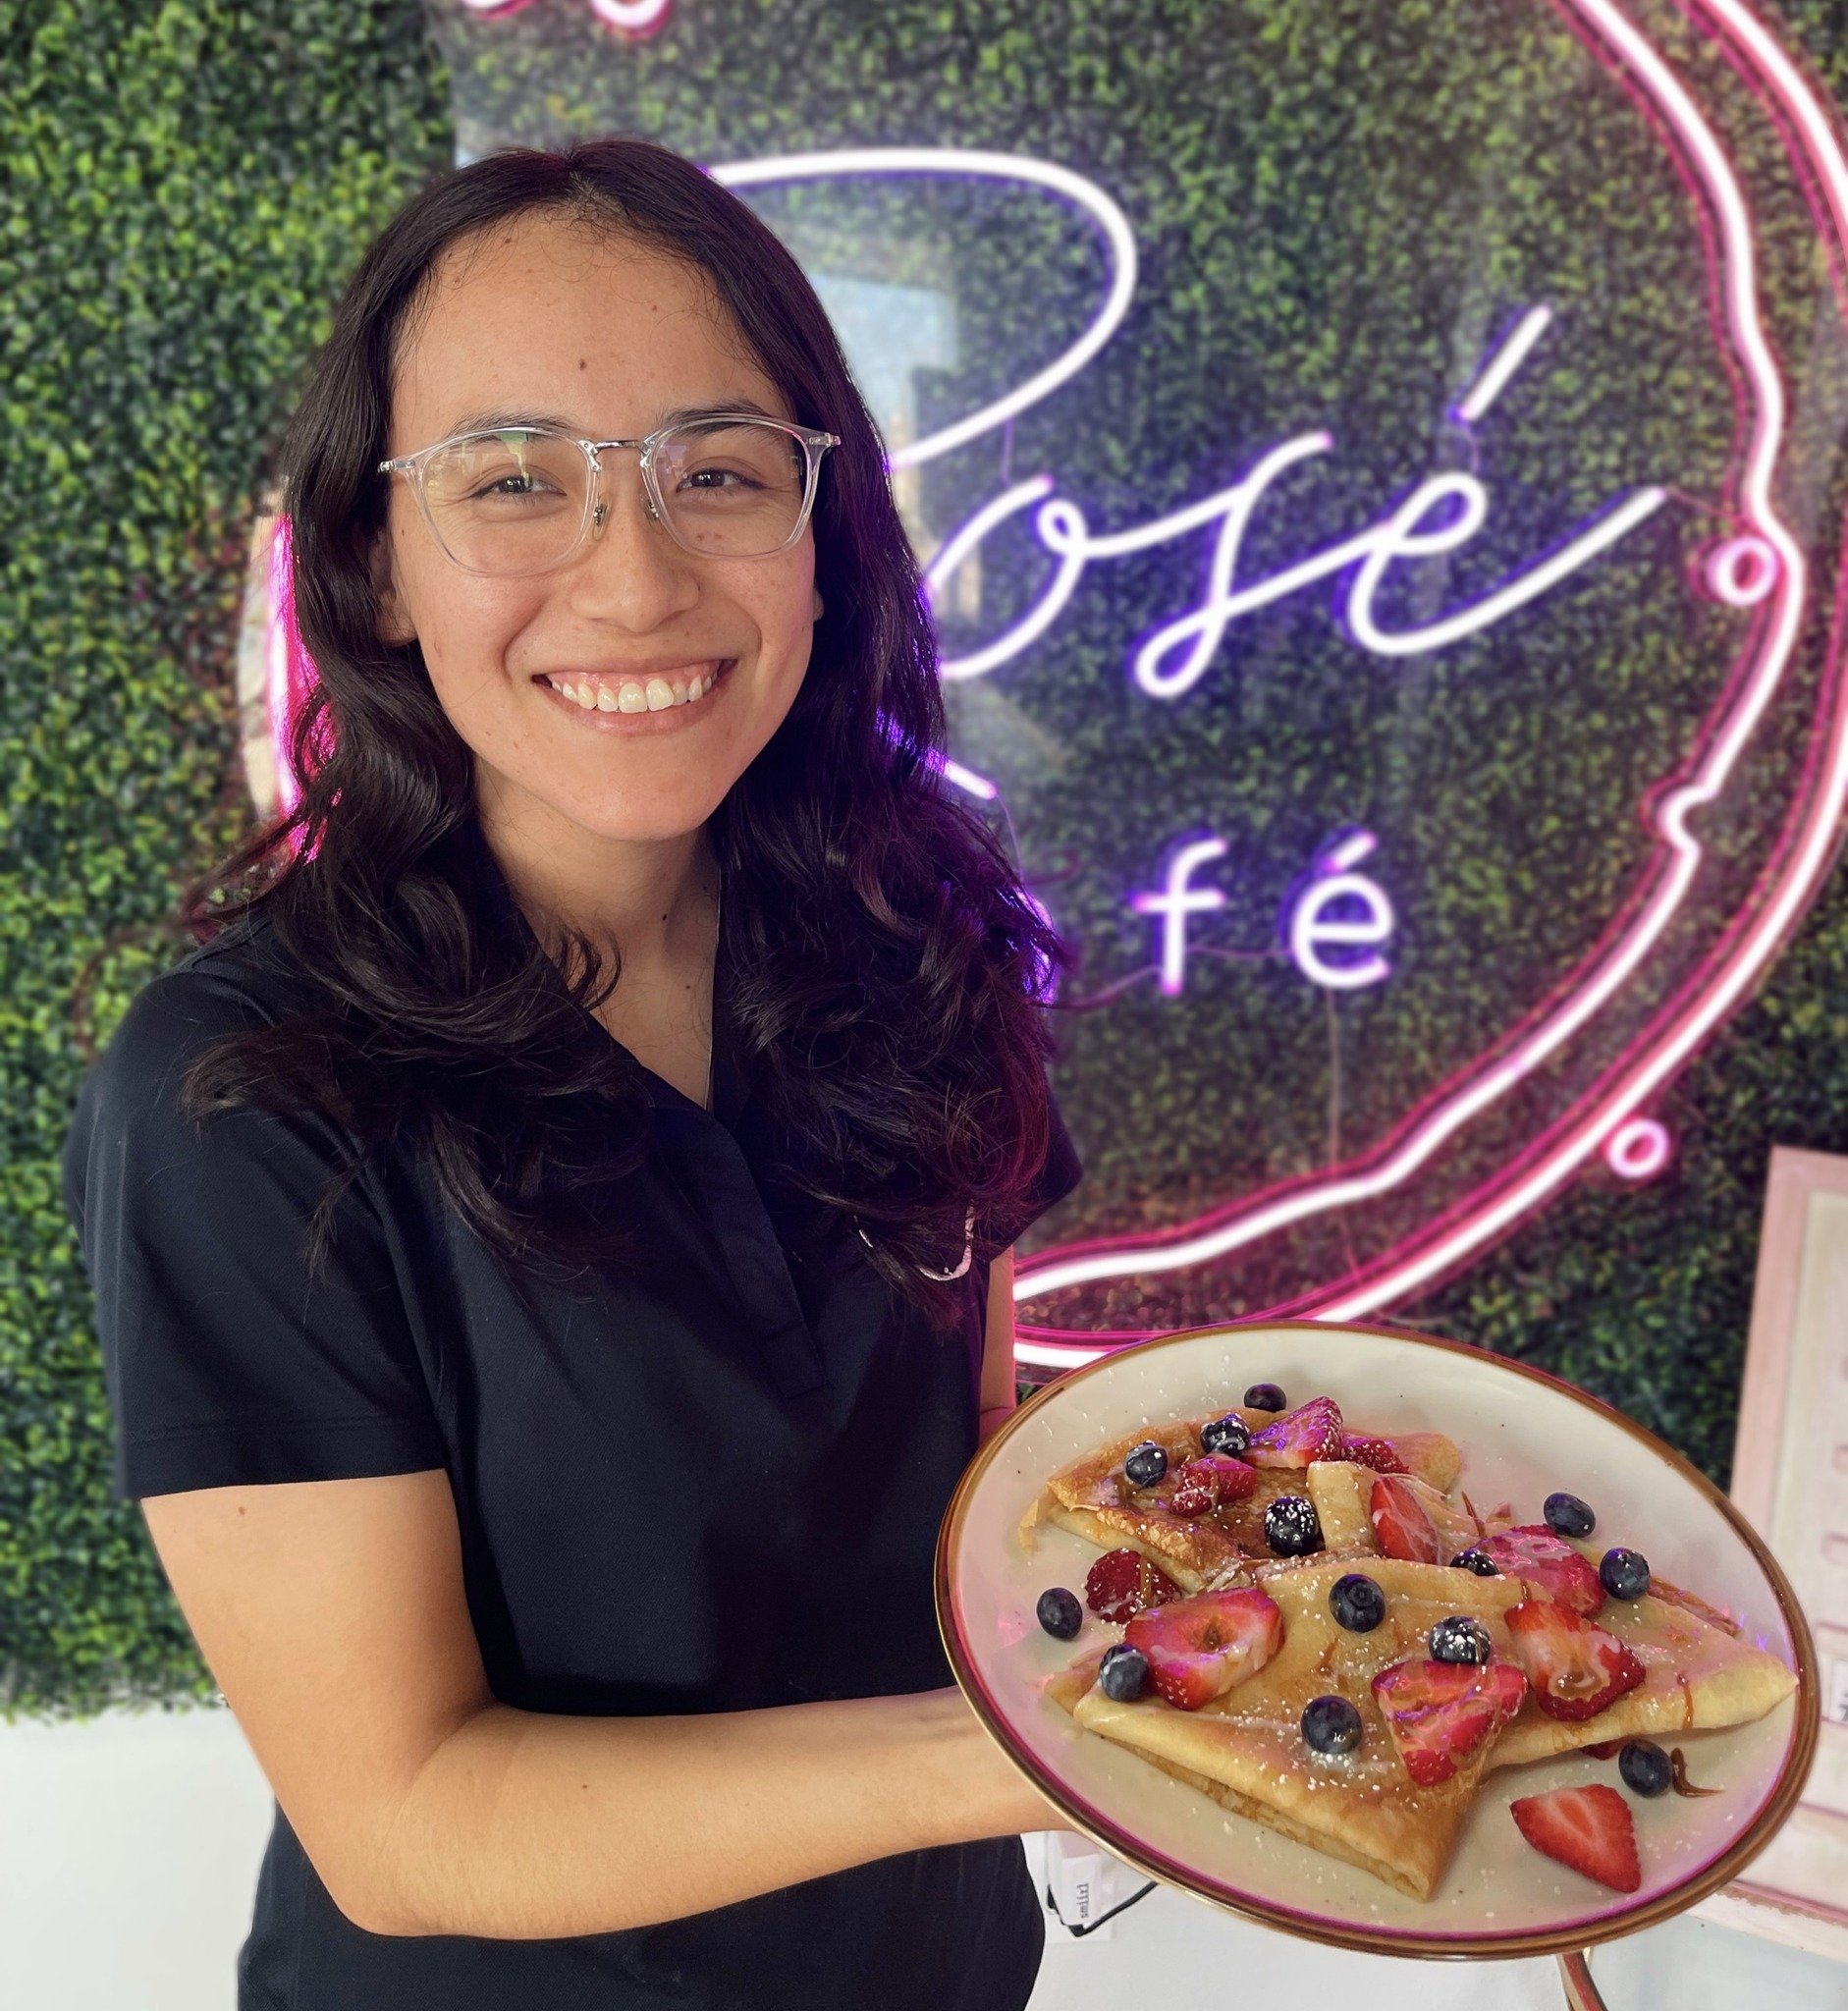 In our friendly ongoing employee competition, we are now in the eighth week! Every employee gets a chance to introduce a &quot;Food Special&quot; to showcase for a week.

This week's special is courtesy of Ruth, a valued team member:
Strawberry Crepe